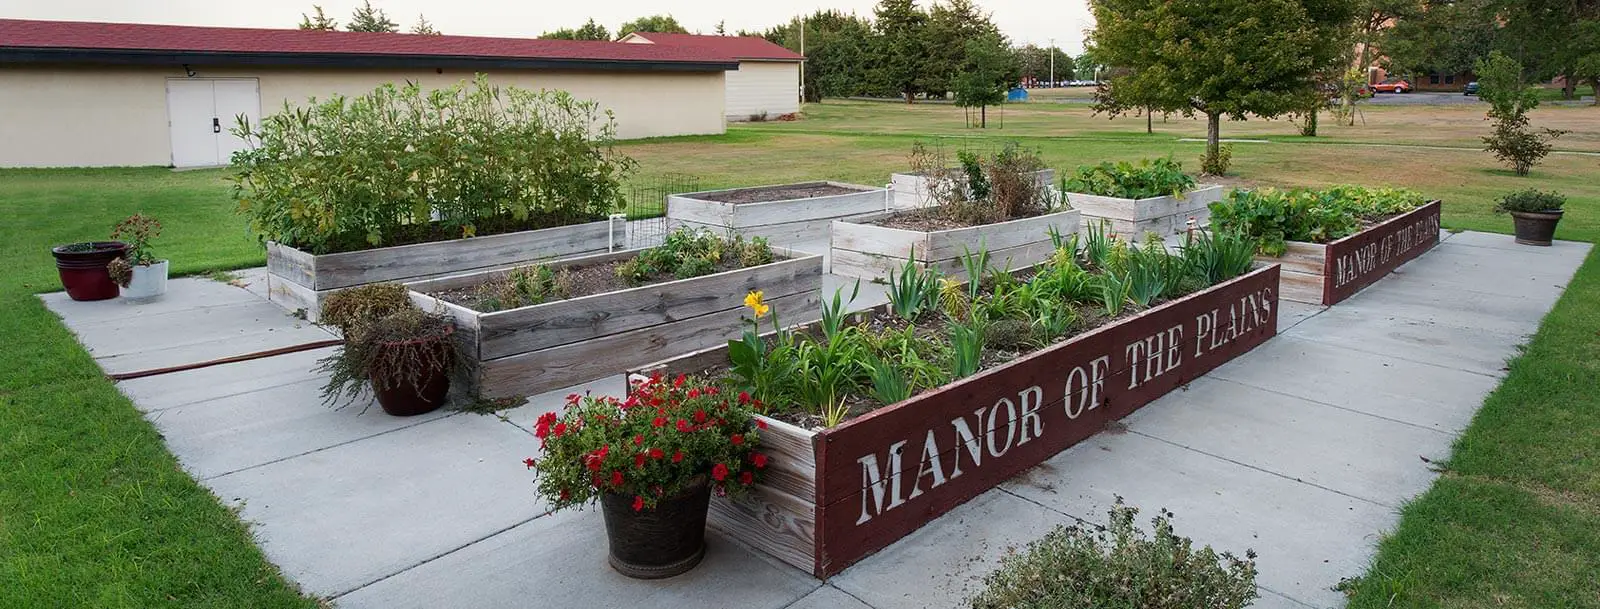 Photo of Manor of the Plains, Assisted Living, Nursing Home, Independent Living, CCRC, Dodge City, KS 1